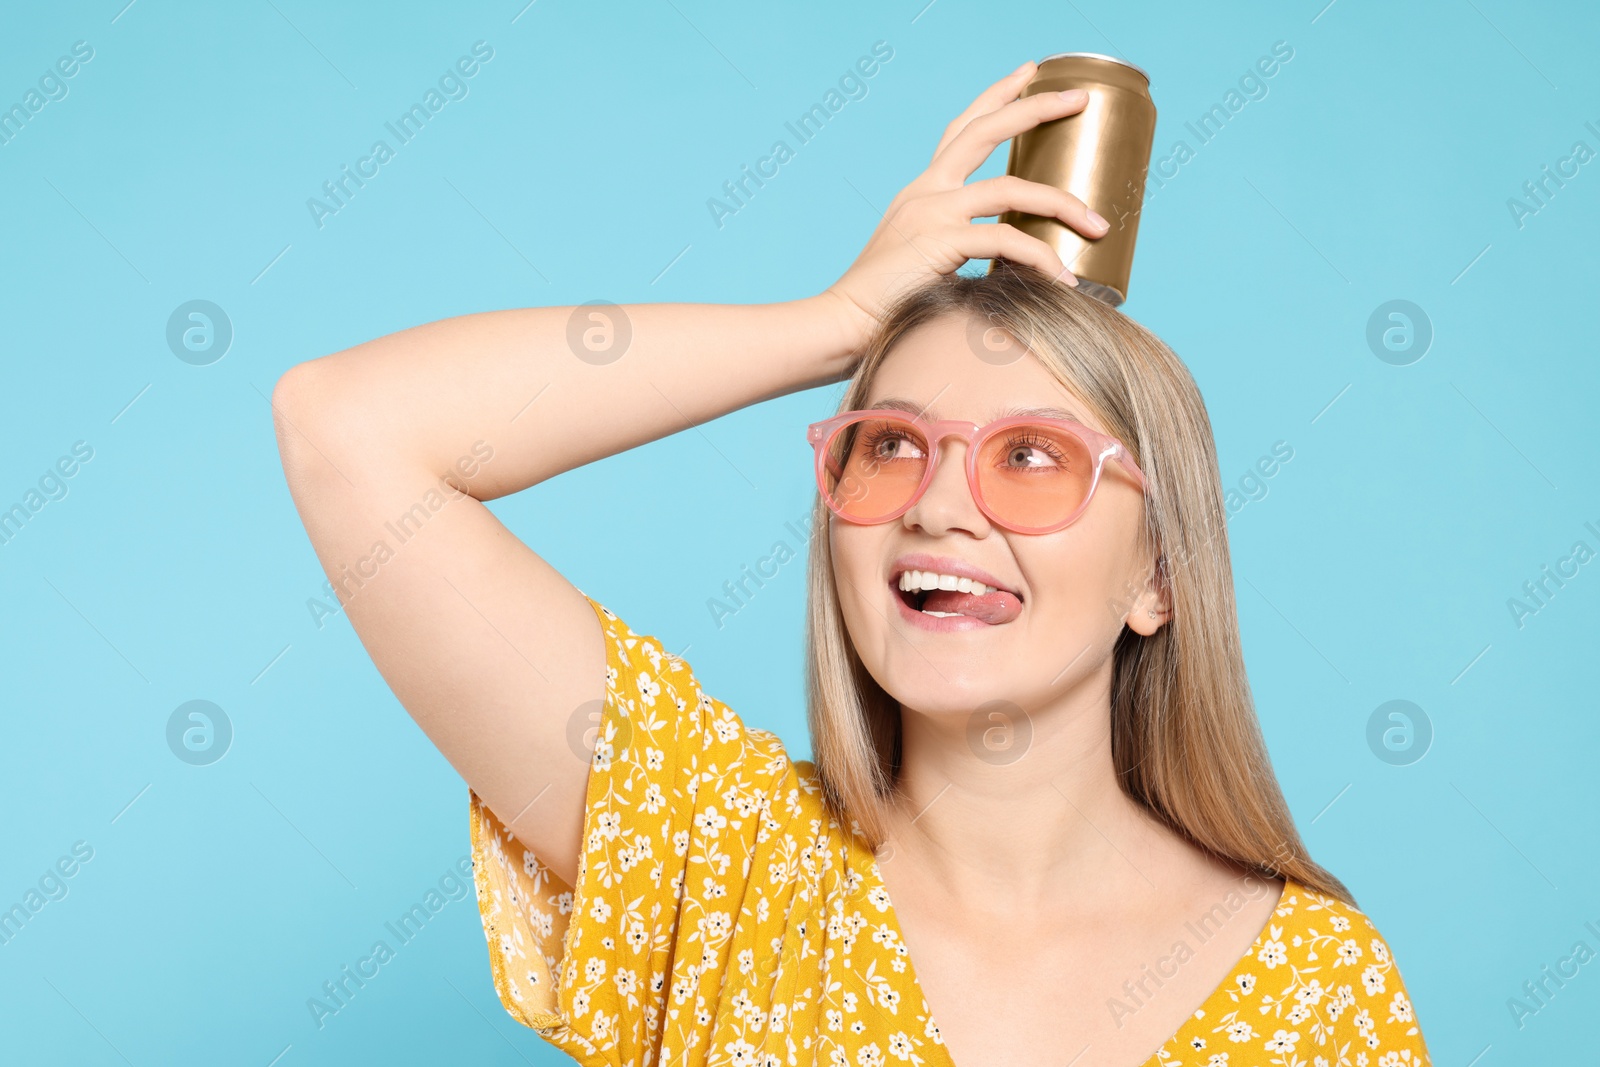 Photo of Beautiful happy woman holding beverage can against light blue background